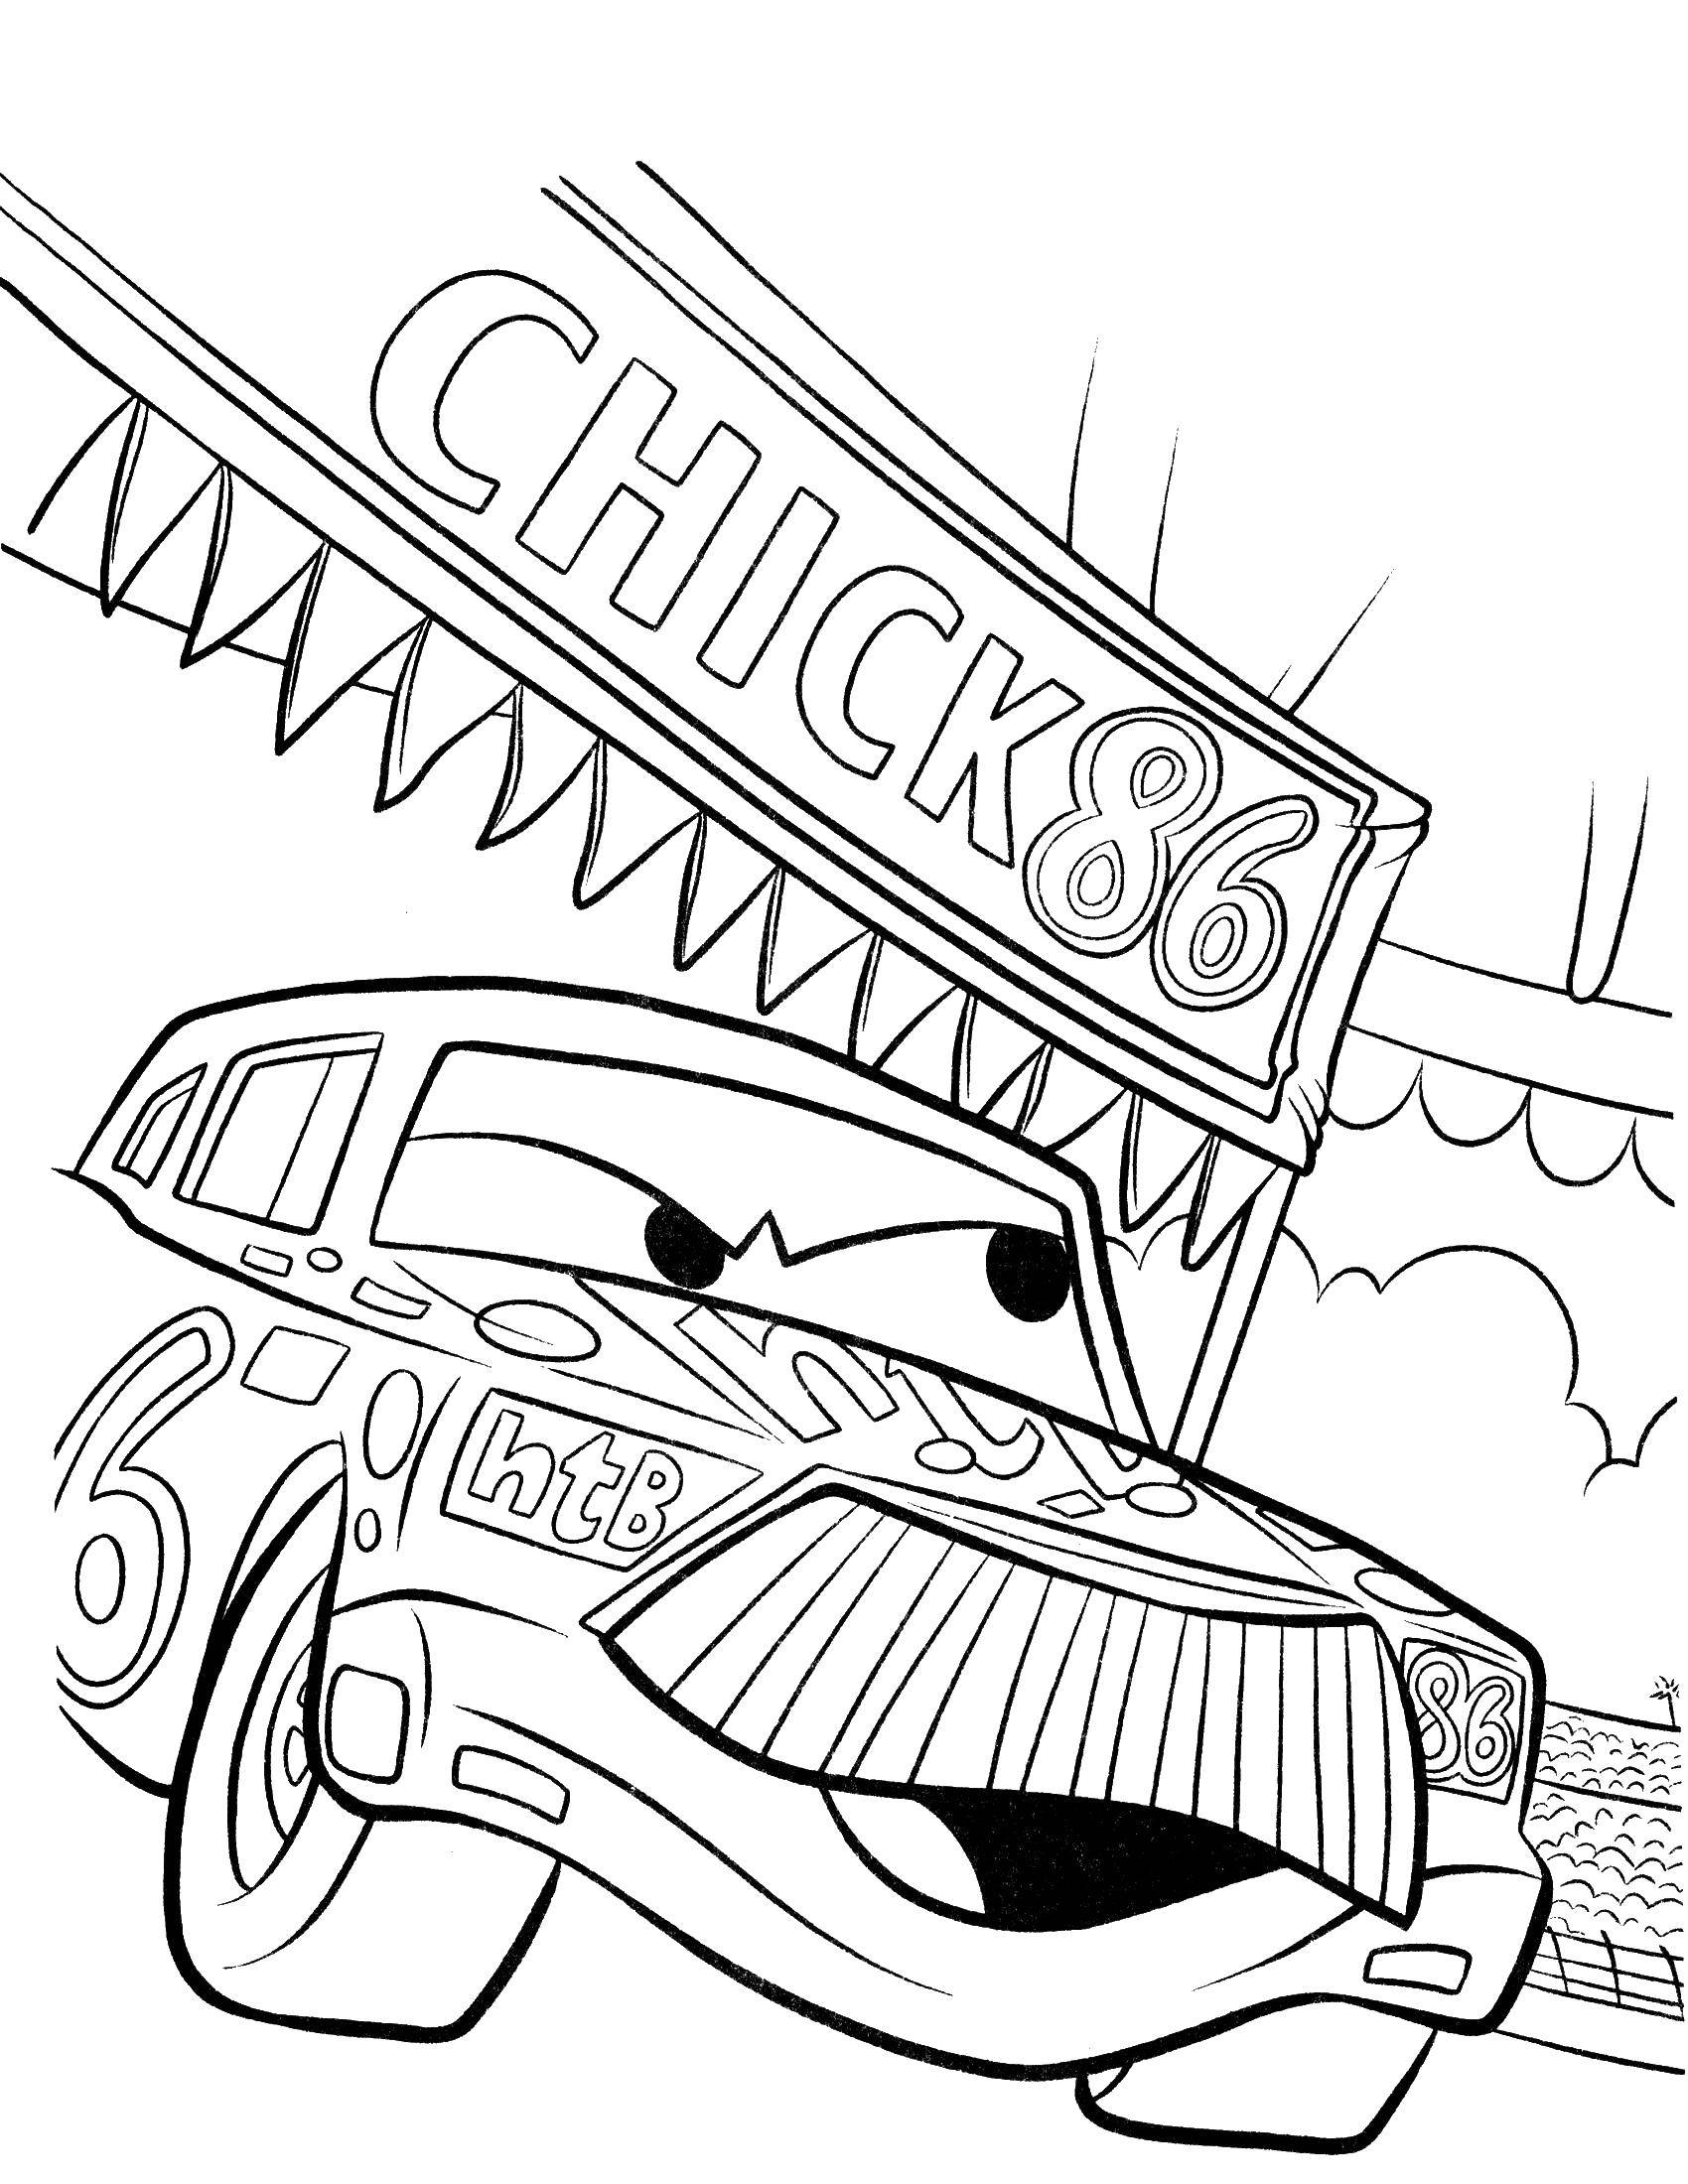 Coloring The car from the cartoon cars . Category cartoons. Tags:  Cartoon character.